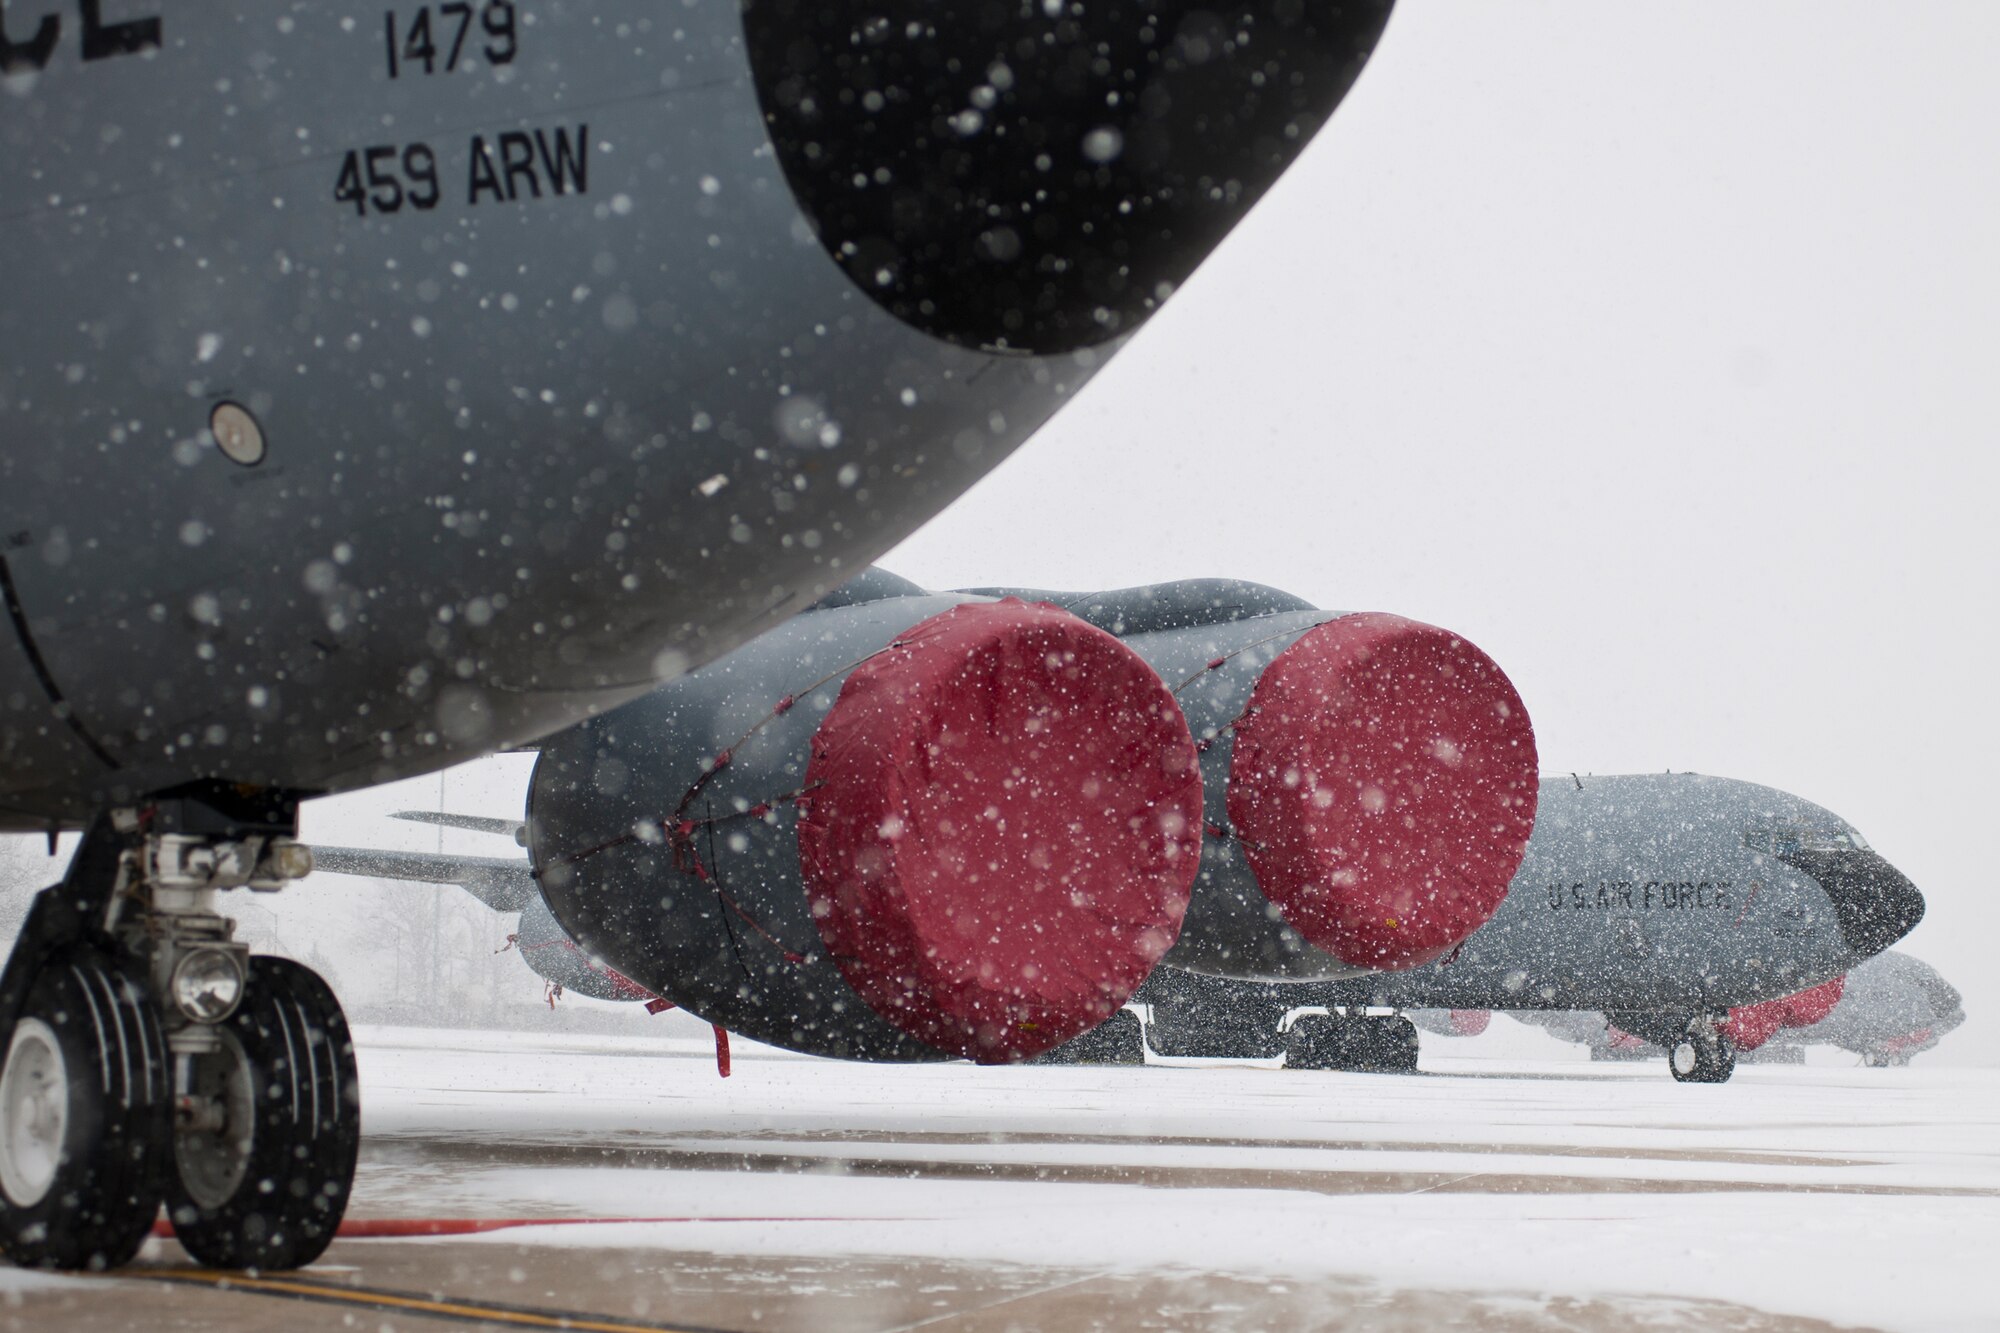 KC-135R Stratotankers with the 459th Air Refueling Wing rest on the Joint Base Andrews, Maryland, flight line during the region's first winter storm of the season Jan. 8, 2017. Up to two inches fell in parts of the National Capital Region during the 459th's drill weekend. (U.S. Air Force photo/Tech. Sgt. Kat Justen)